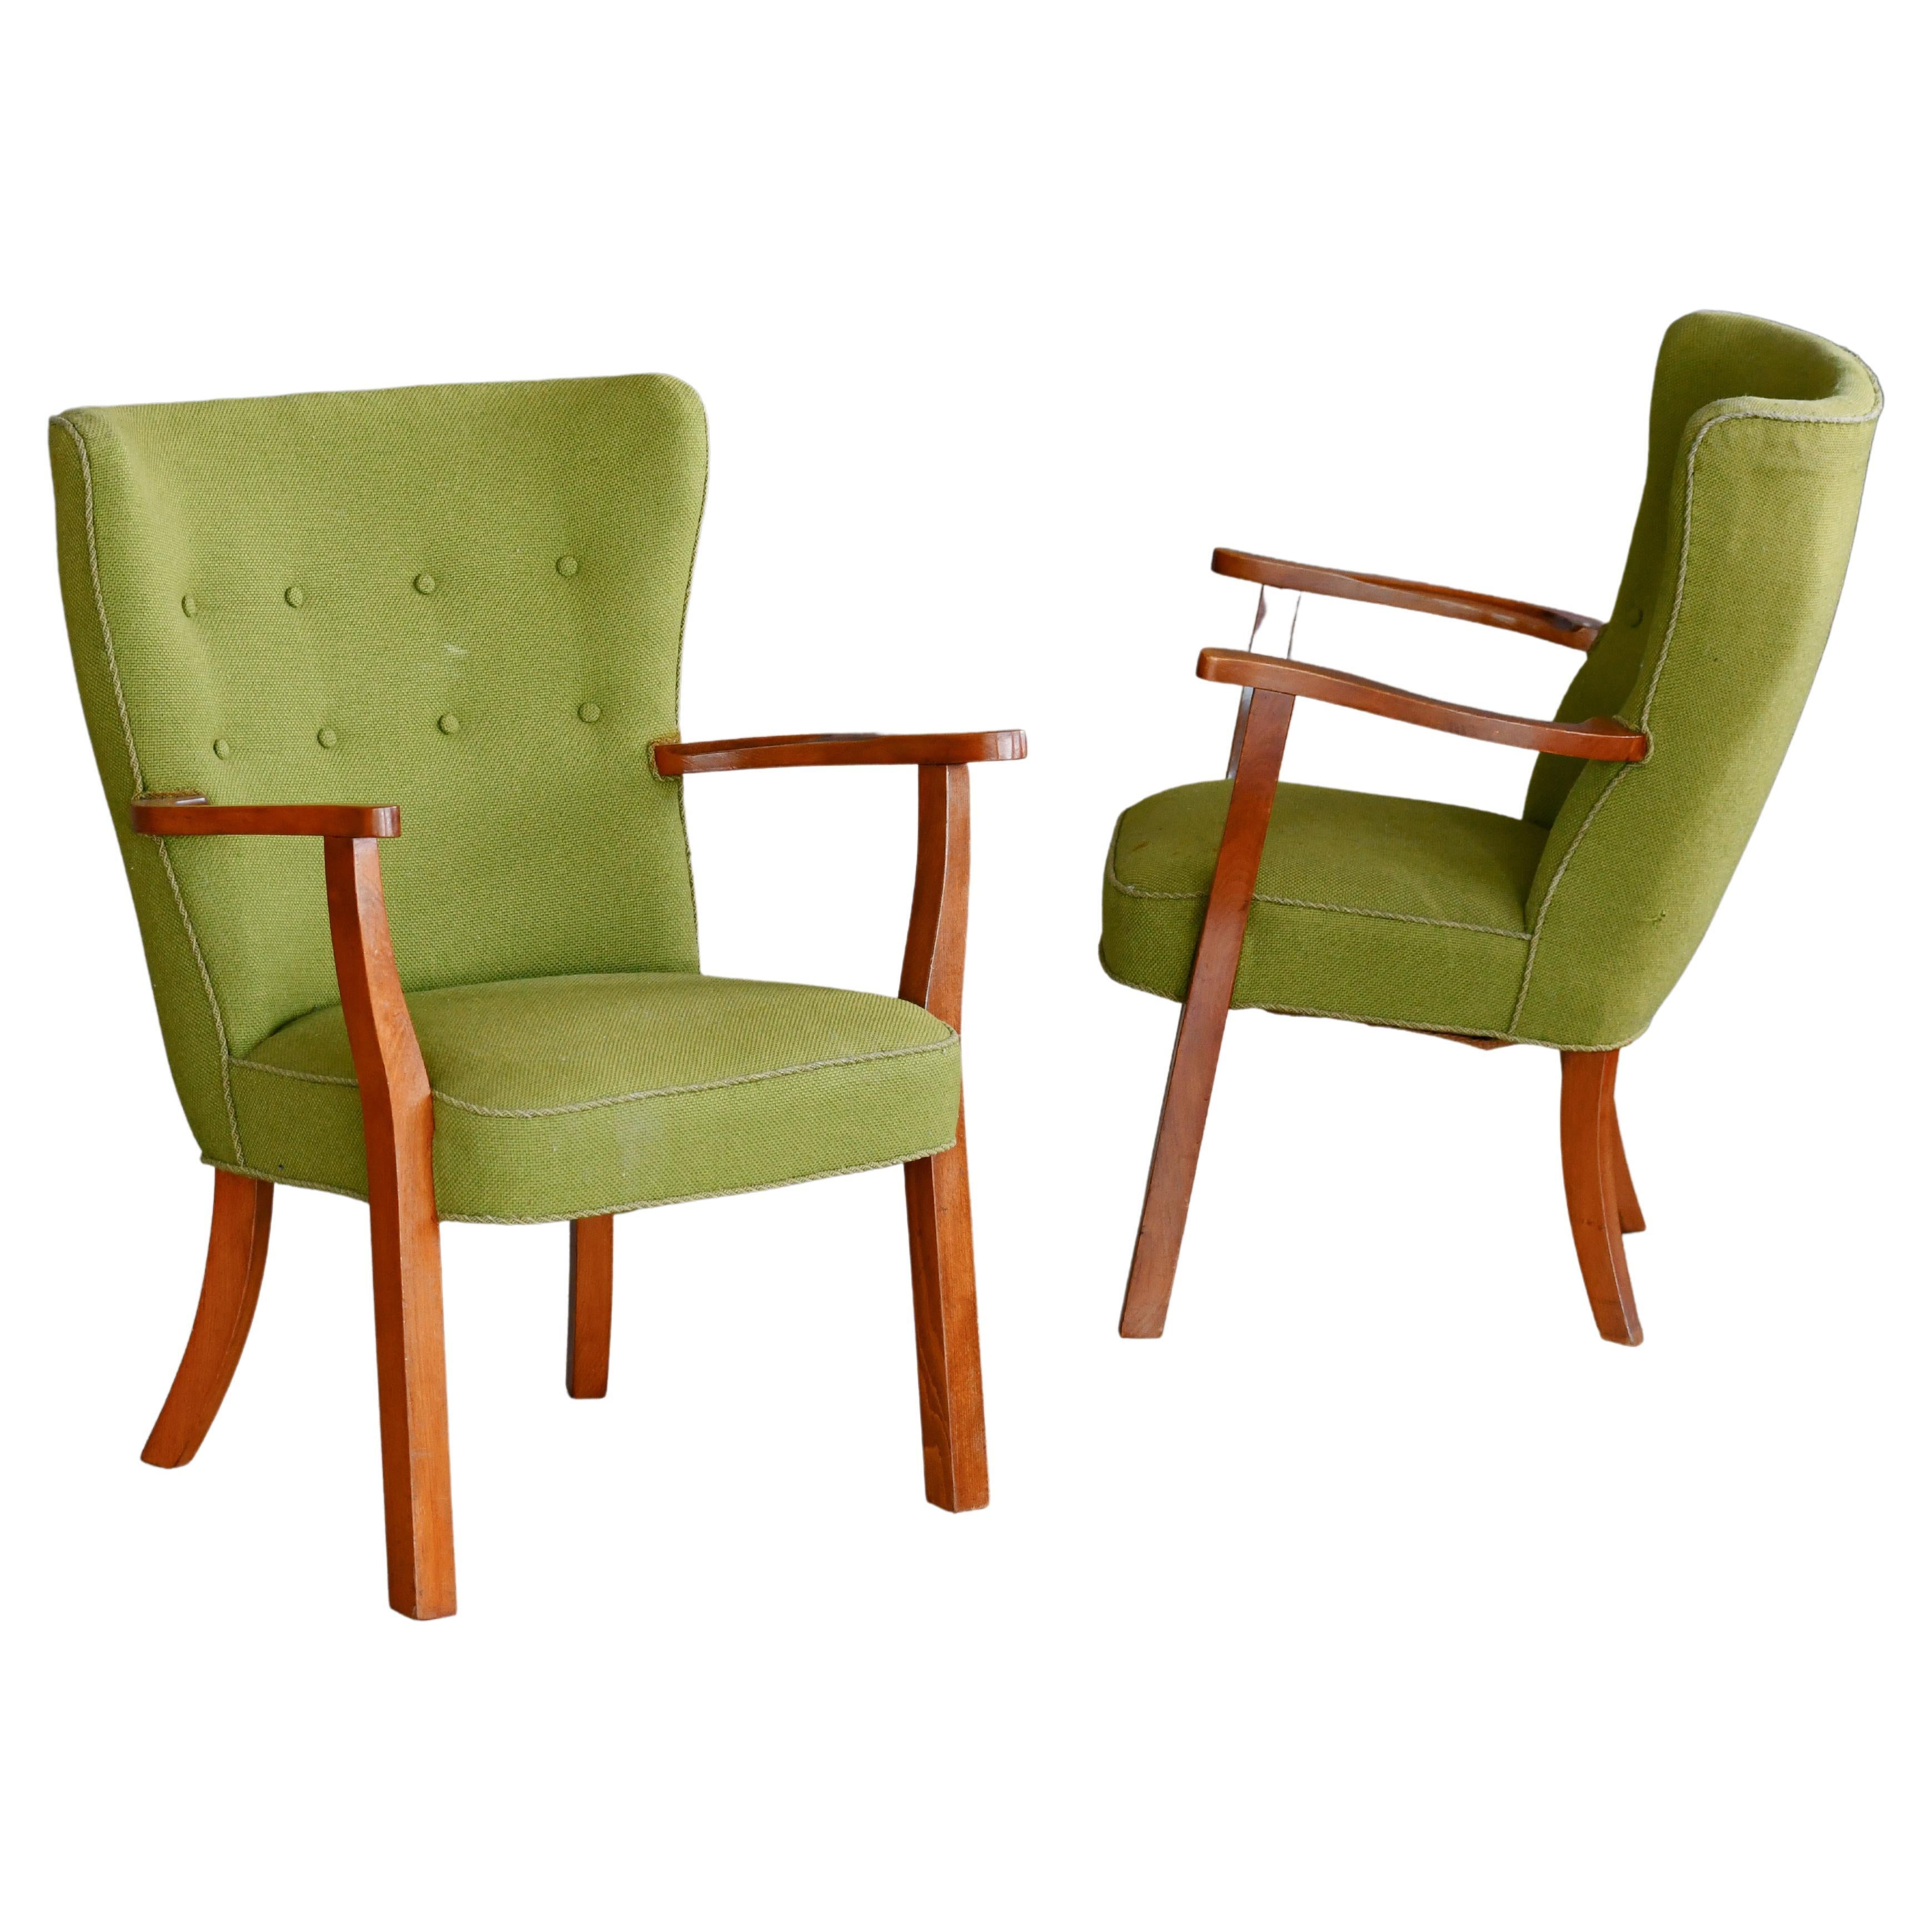 Pair of Danish Lounge or Armchairs with Teak legs and Armrests, 1950's. For Sale